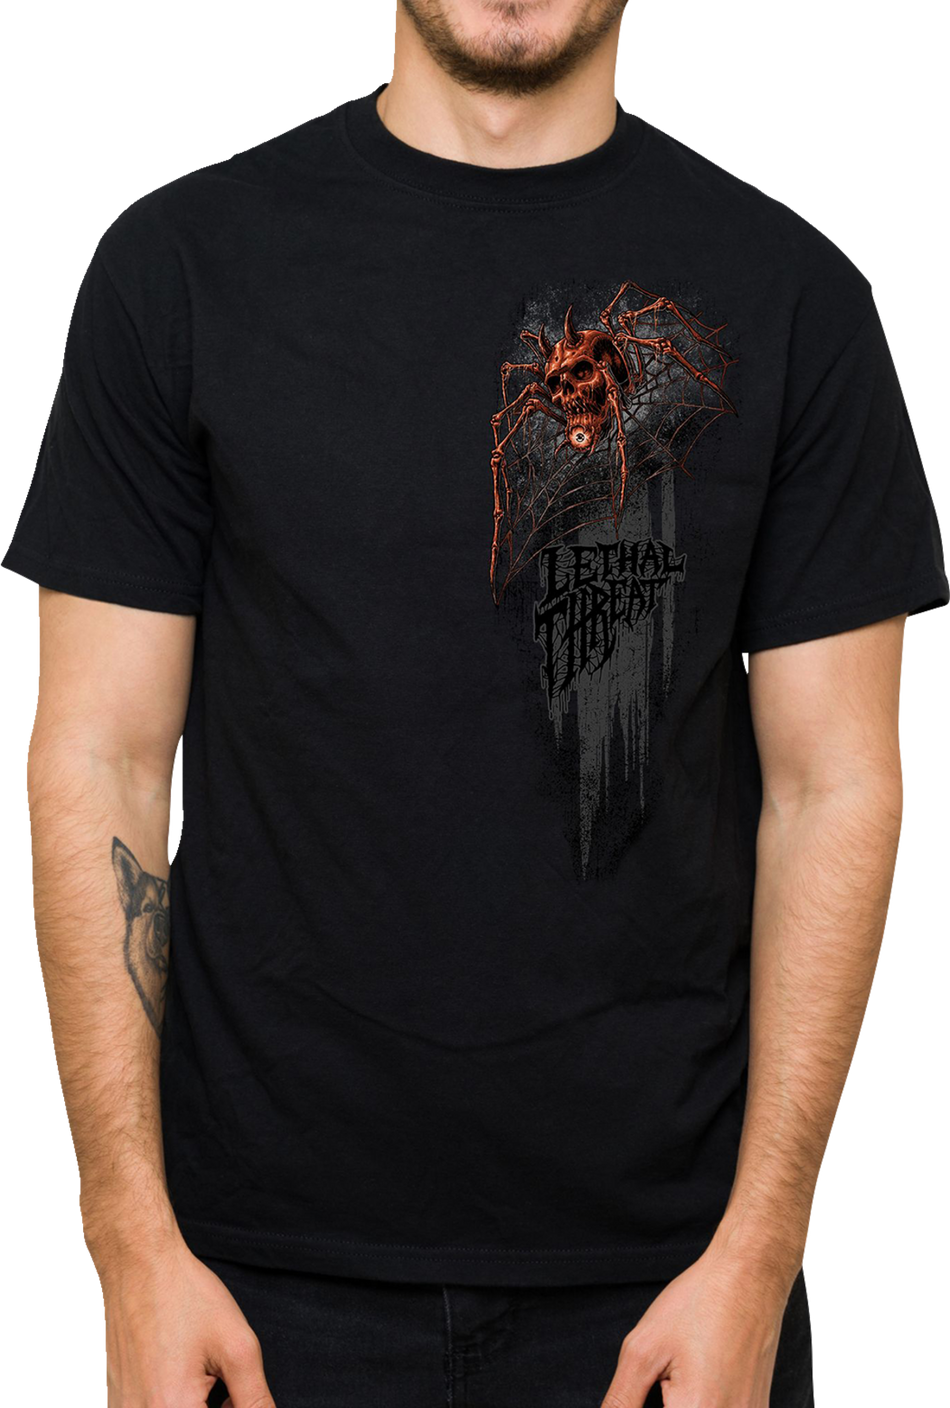 LETHAL THREAT Know Your Darkness T-Shirt - Black - XL LT20902XL